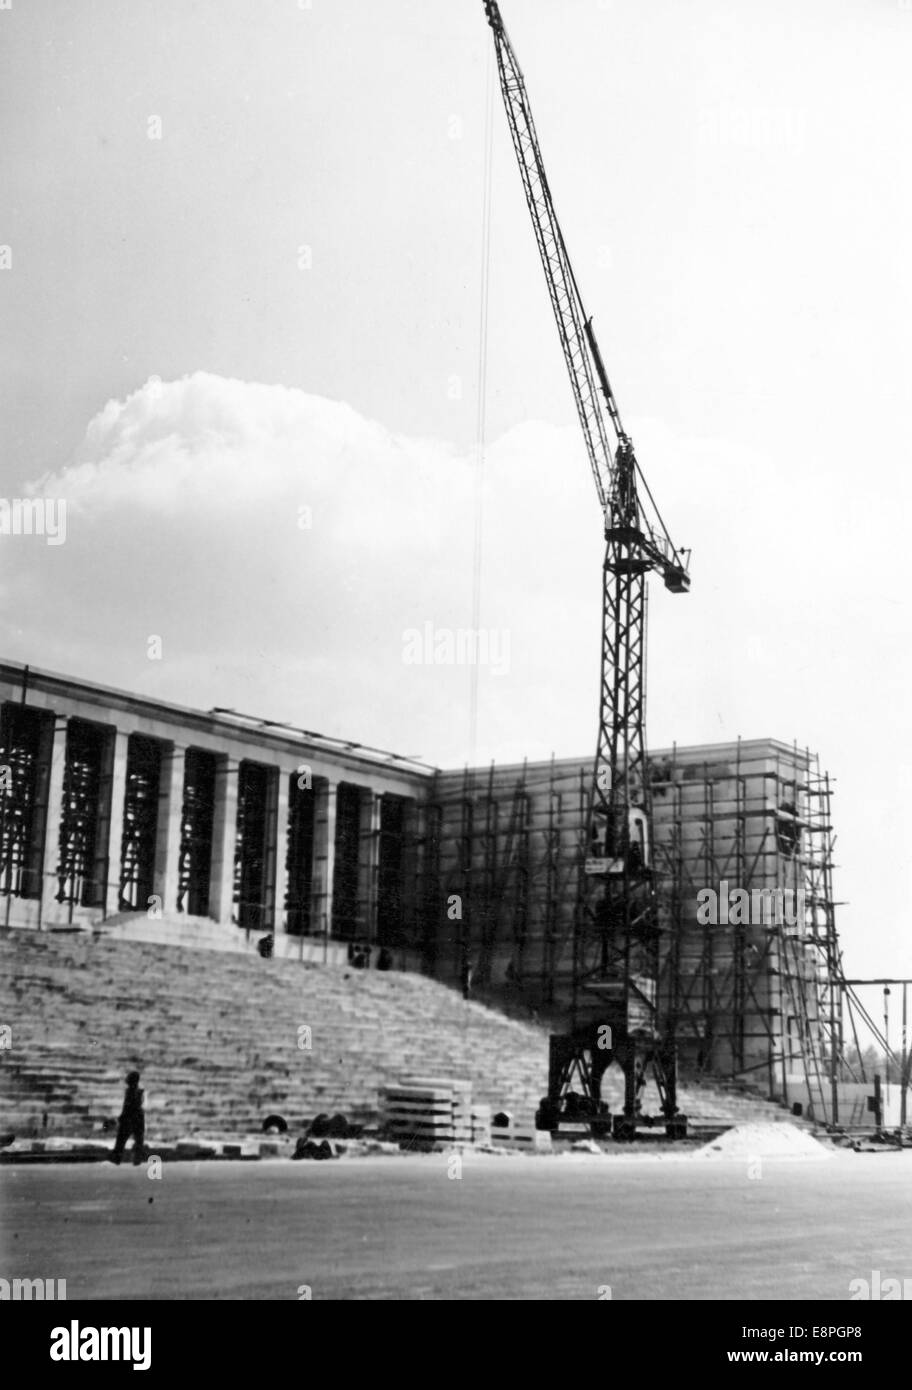 Building works on the grandstand of Zeppelin Field at the Nazi party rally grounds in Nuremberg, 1935/36. Construction works on the grandstand started after the Nuremberg Rally 1935 and it was completed in time for the Nuremberg Rally 1936. (Flaws in quality due to the historic picture copy) Fotoarchiv für Zeitgeschichtee - NO WIRE SERVICE - Stock Photo